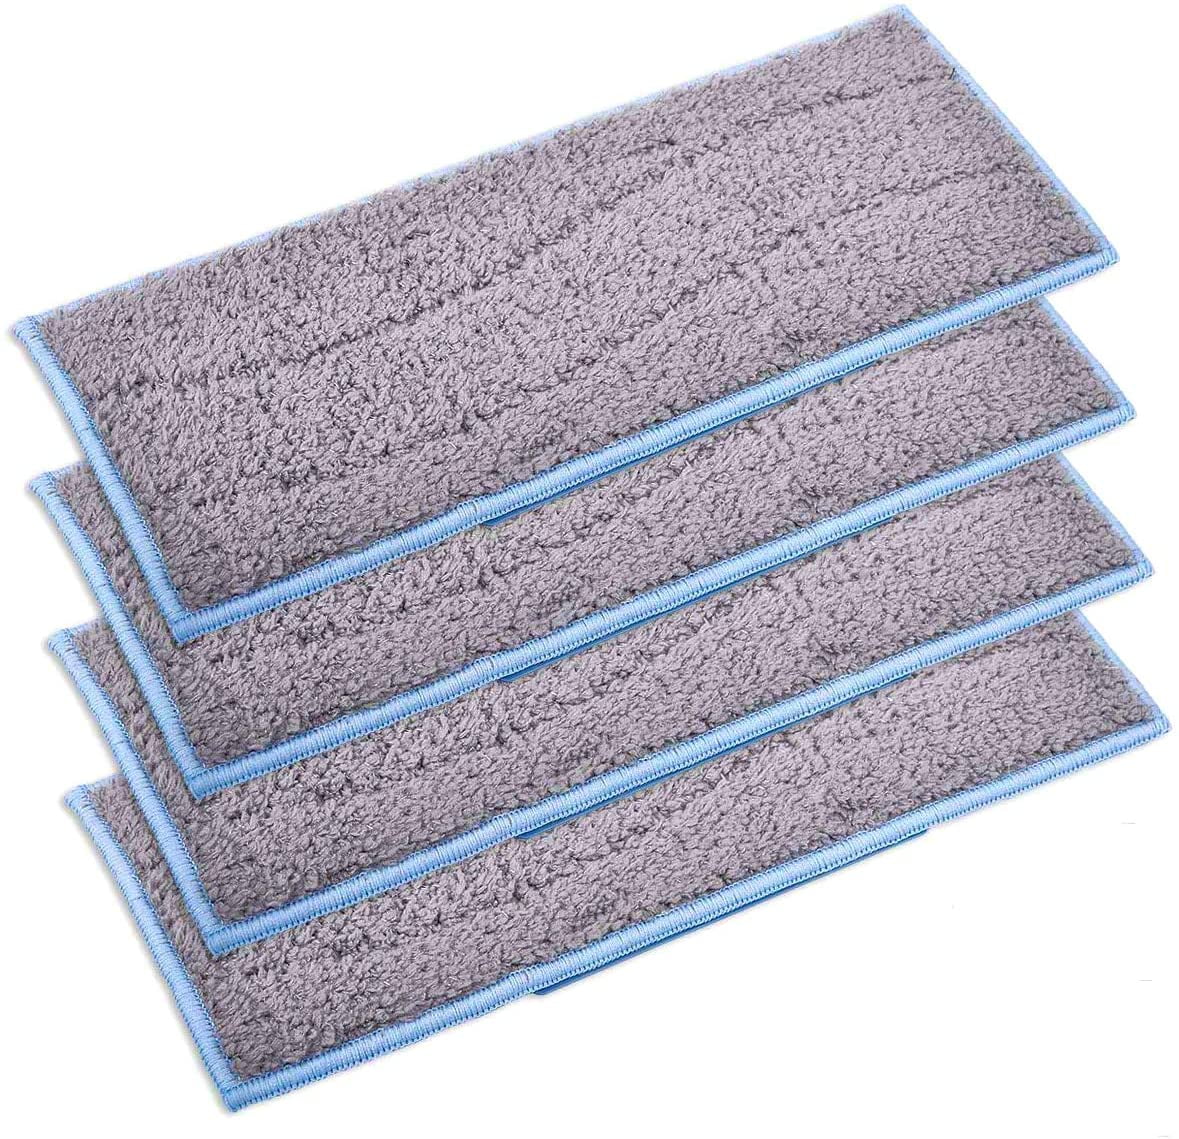 4 VACUSHOP Reusable Mop Cloth Compatible with 2 Tank System Spinning Mops Accessories Parts Microfiber X4 Mop 